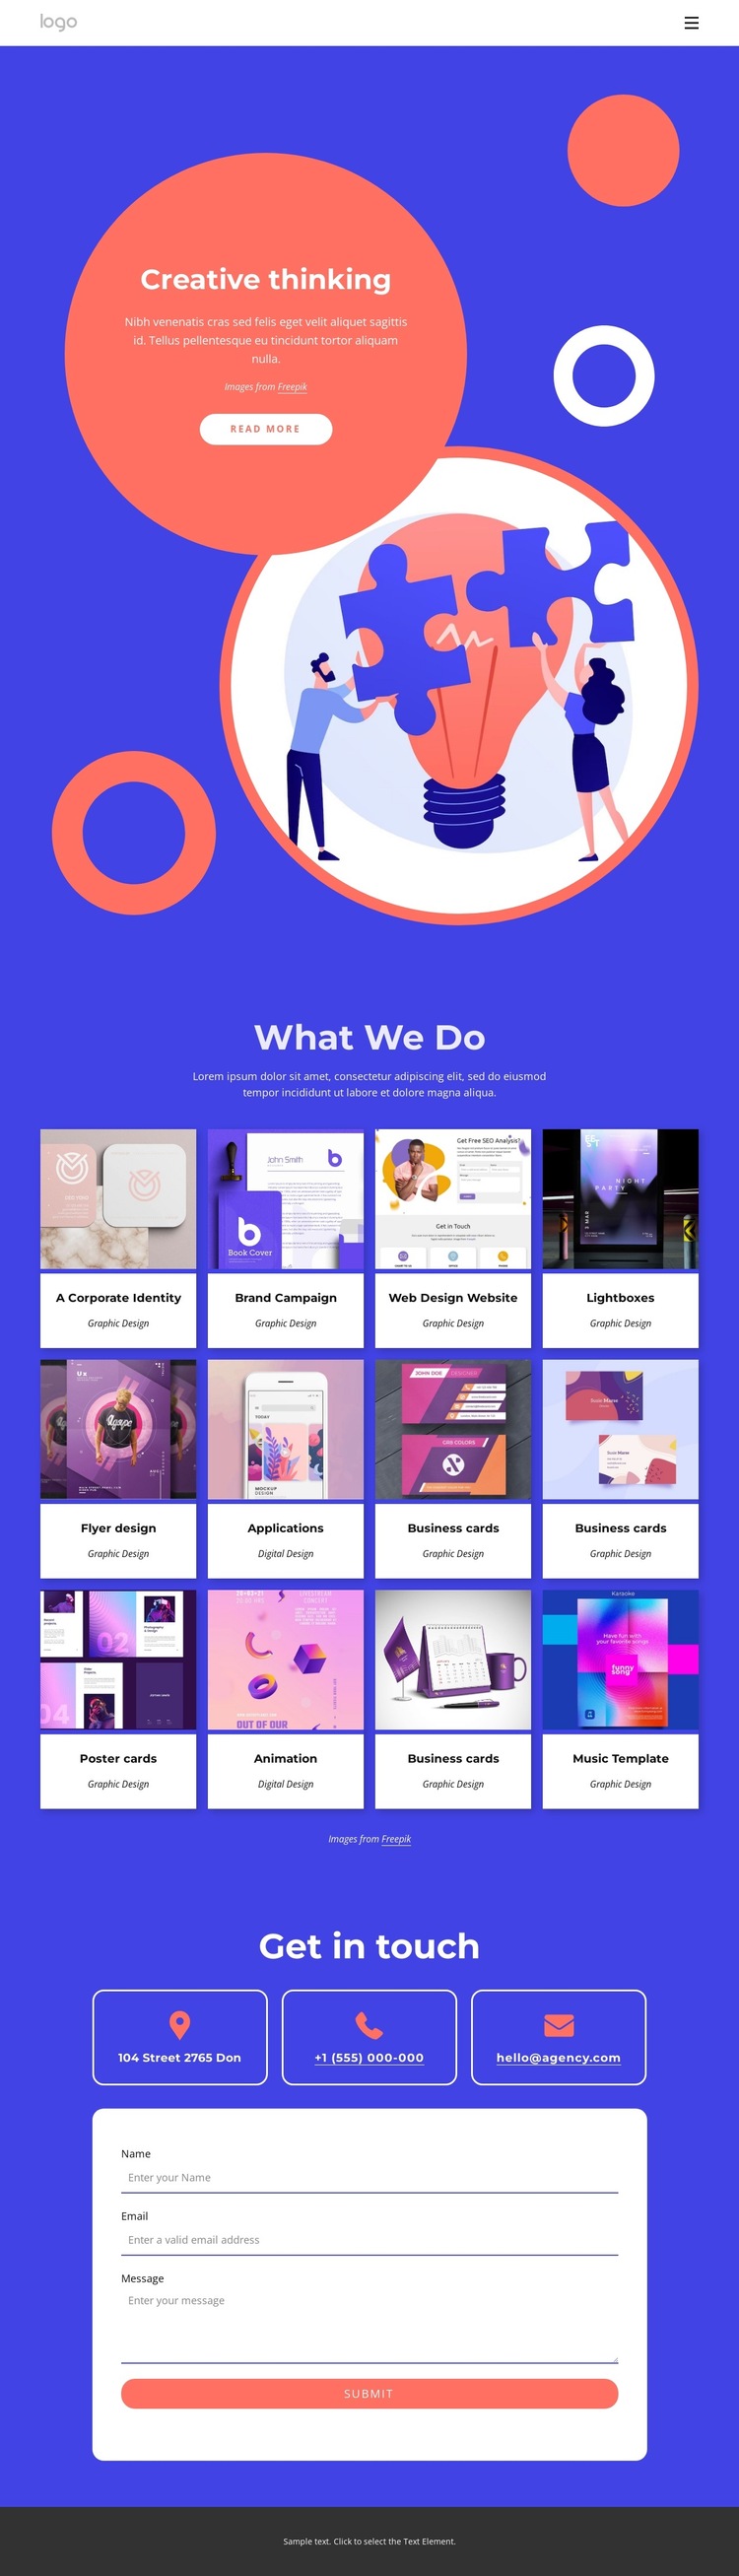 Campaigns, mobile and digital HTML5 Template